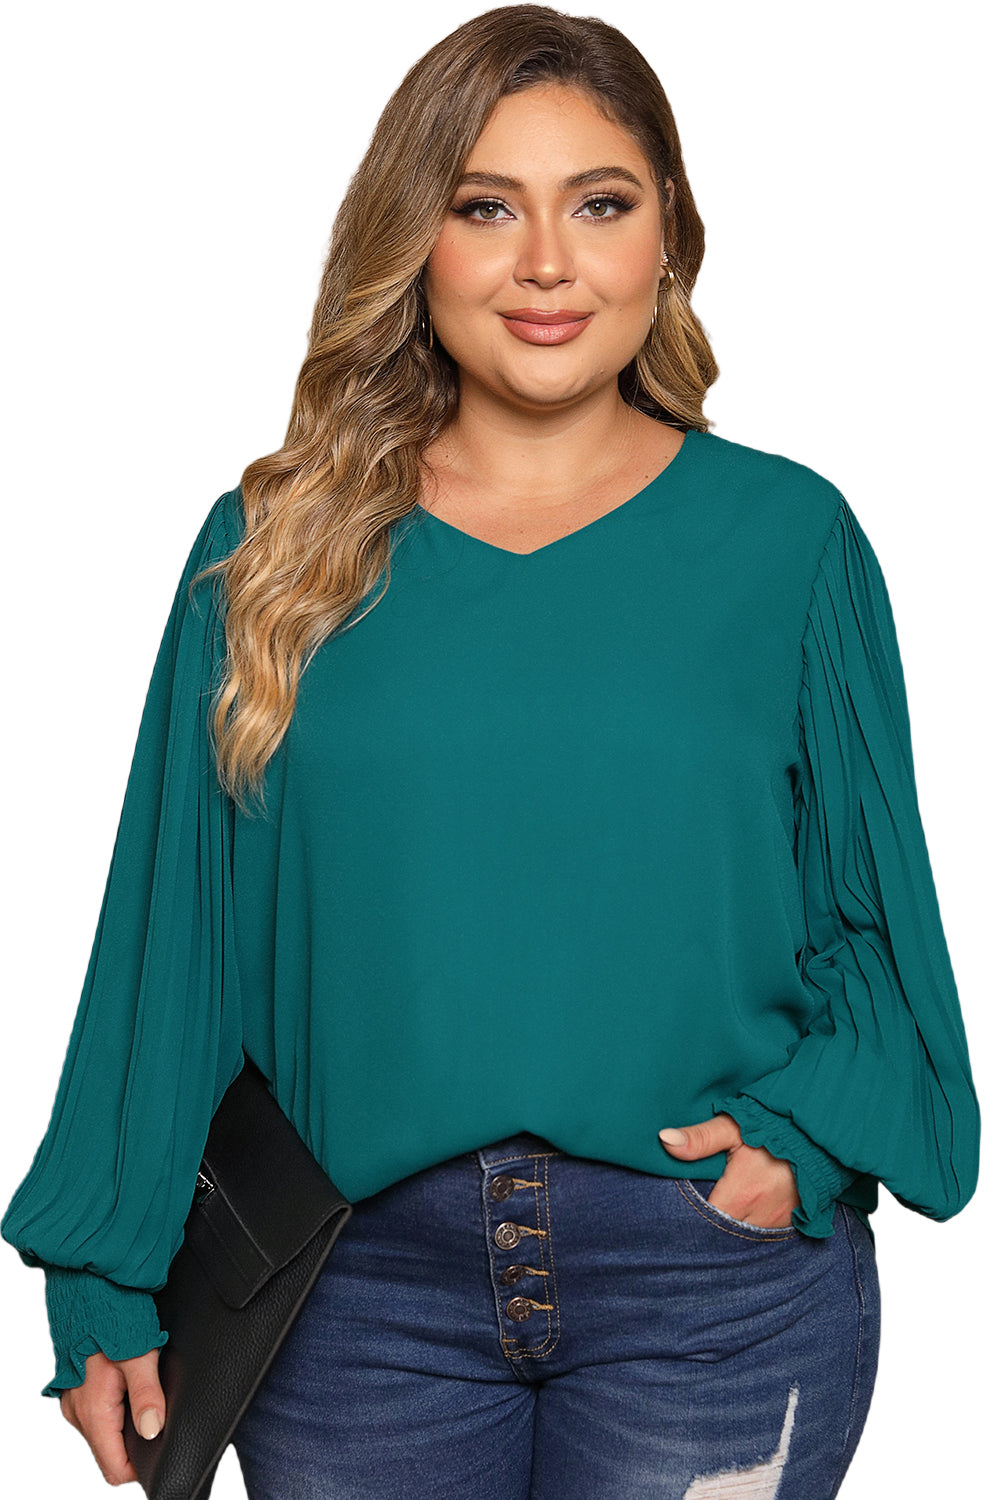 Green Pleated Bubble Sleeve Plus Size Blouse